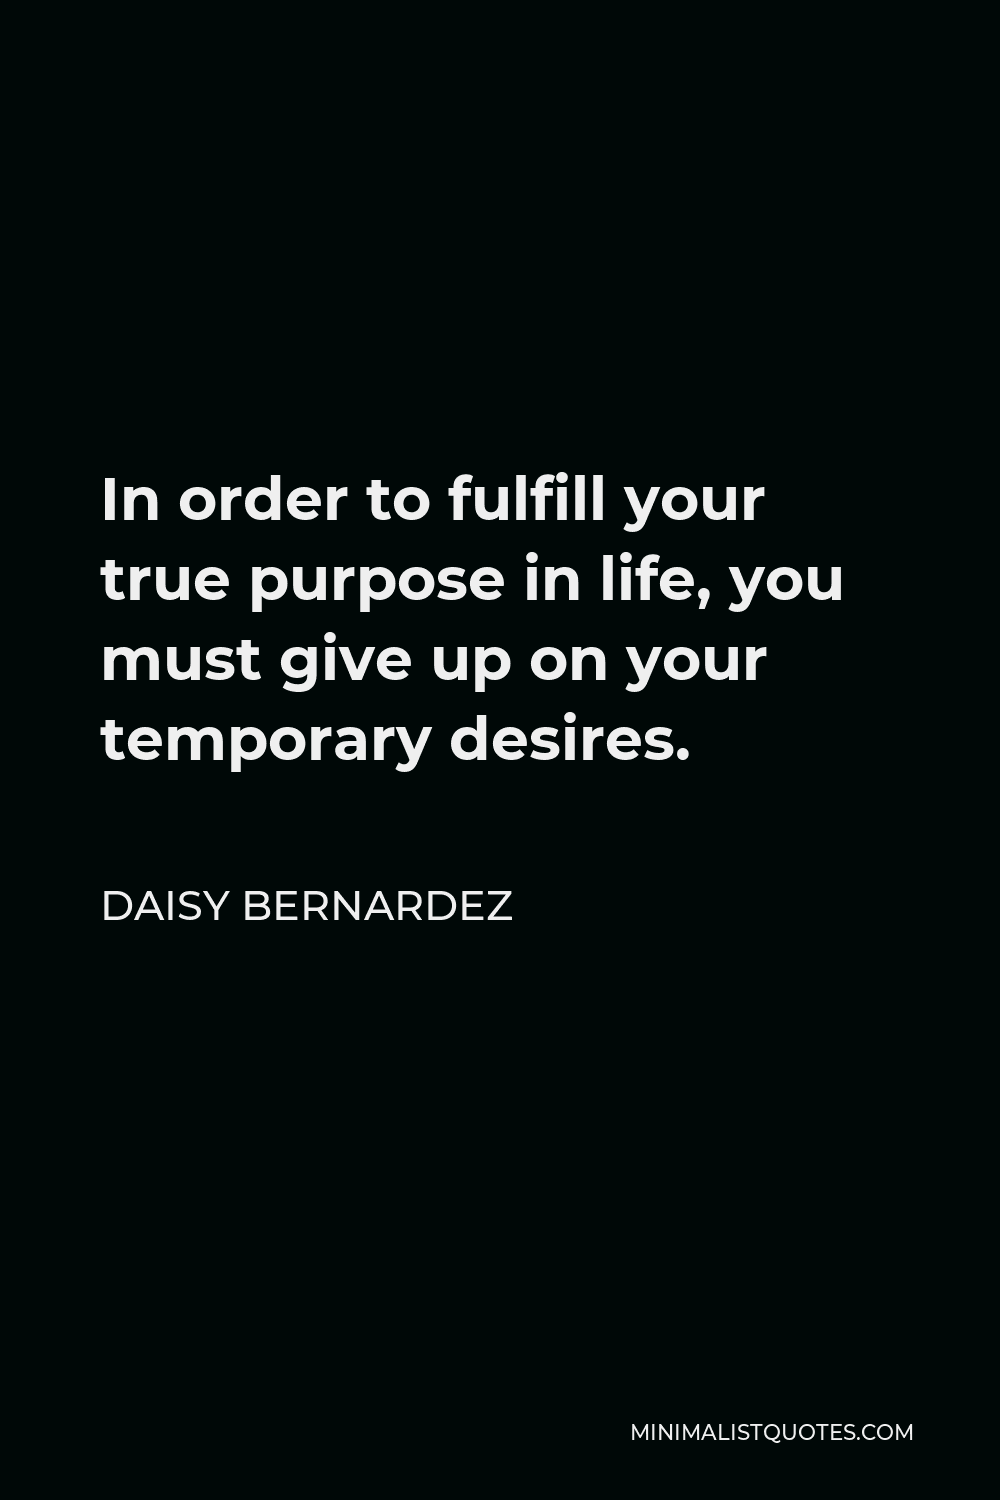 Daisy Bernardez Quote - In order to fulfill your true purpose in life, you must give up on your temporary desires.